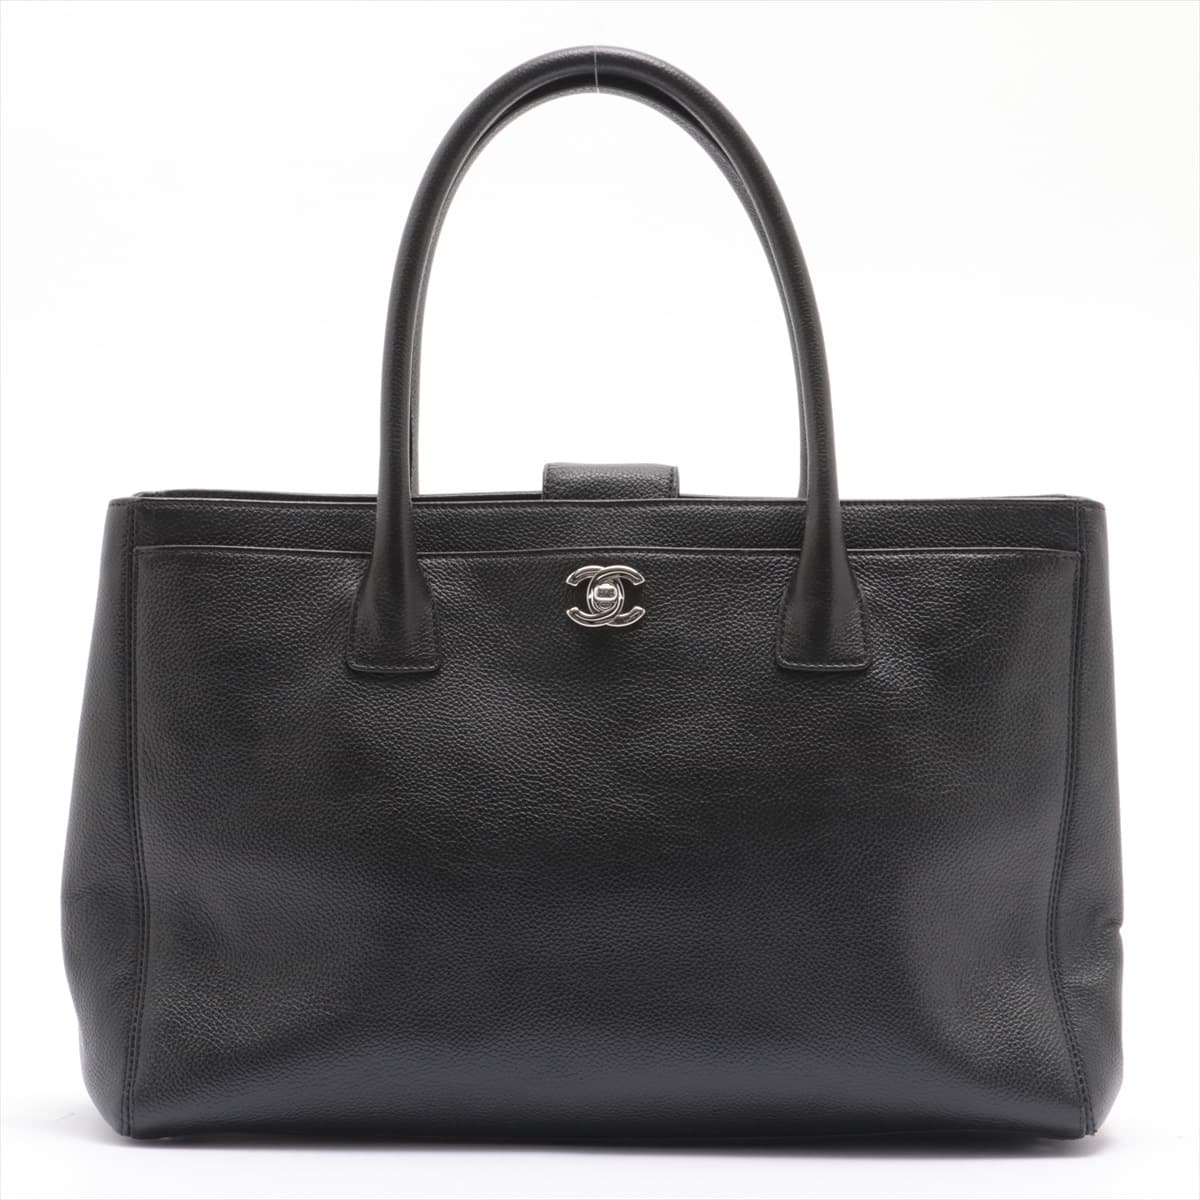 Chanel Executive Leather 2way handbag Black Silver Metal fittings 16XXXXXX Comes with divider pouch